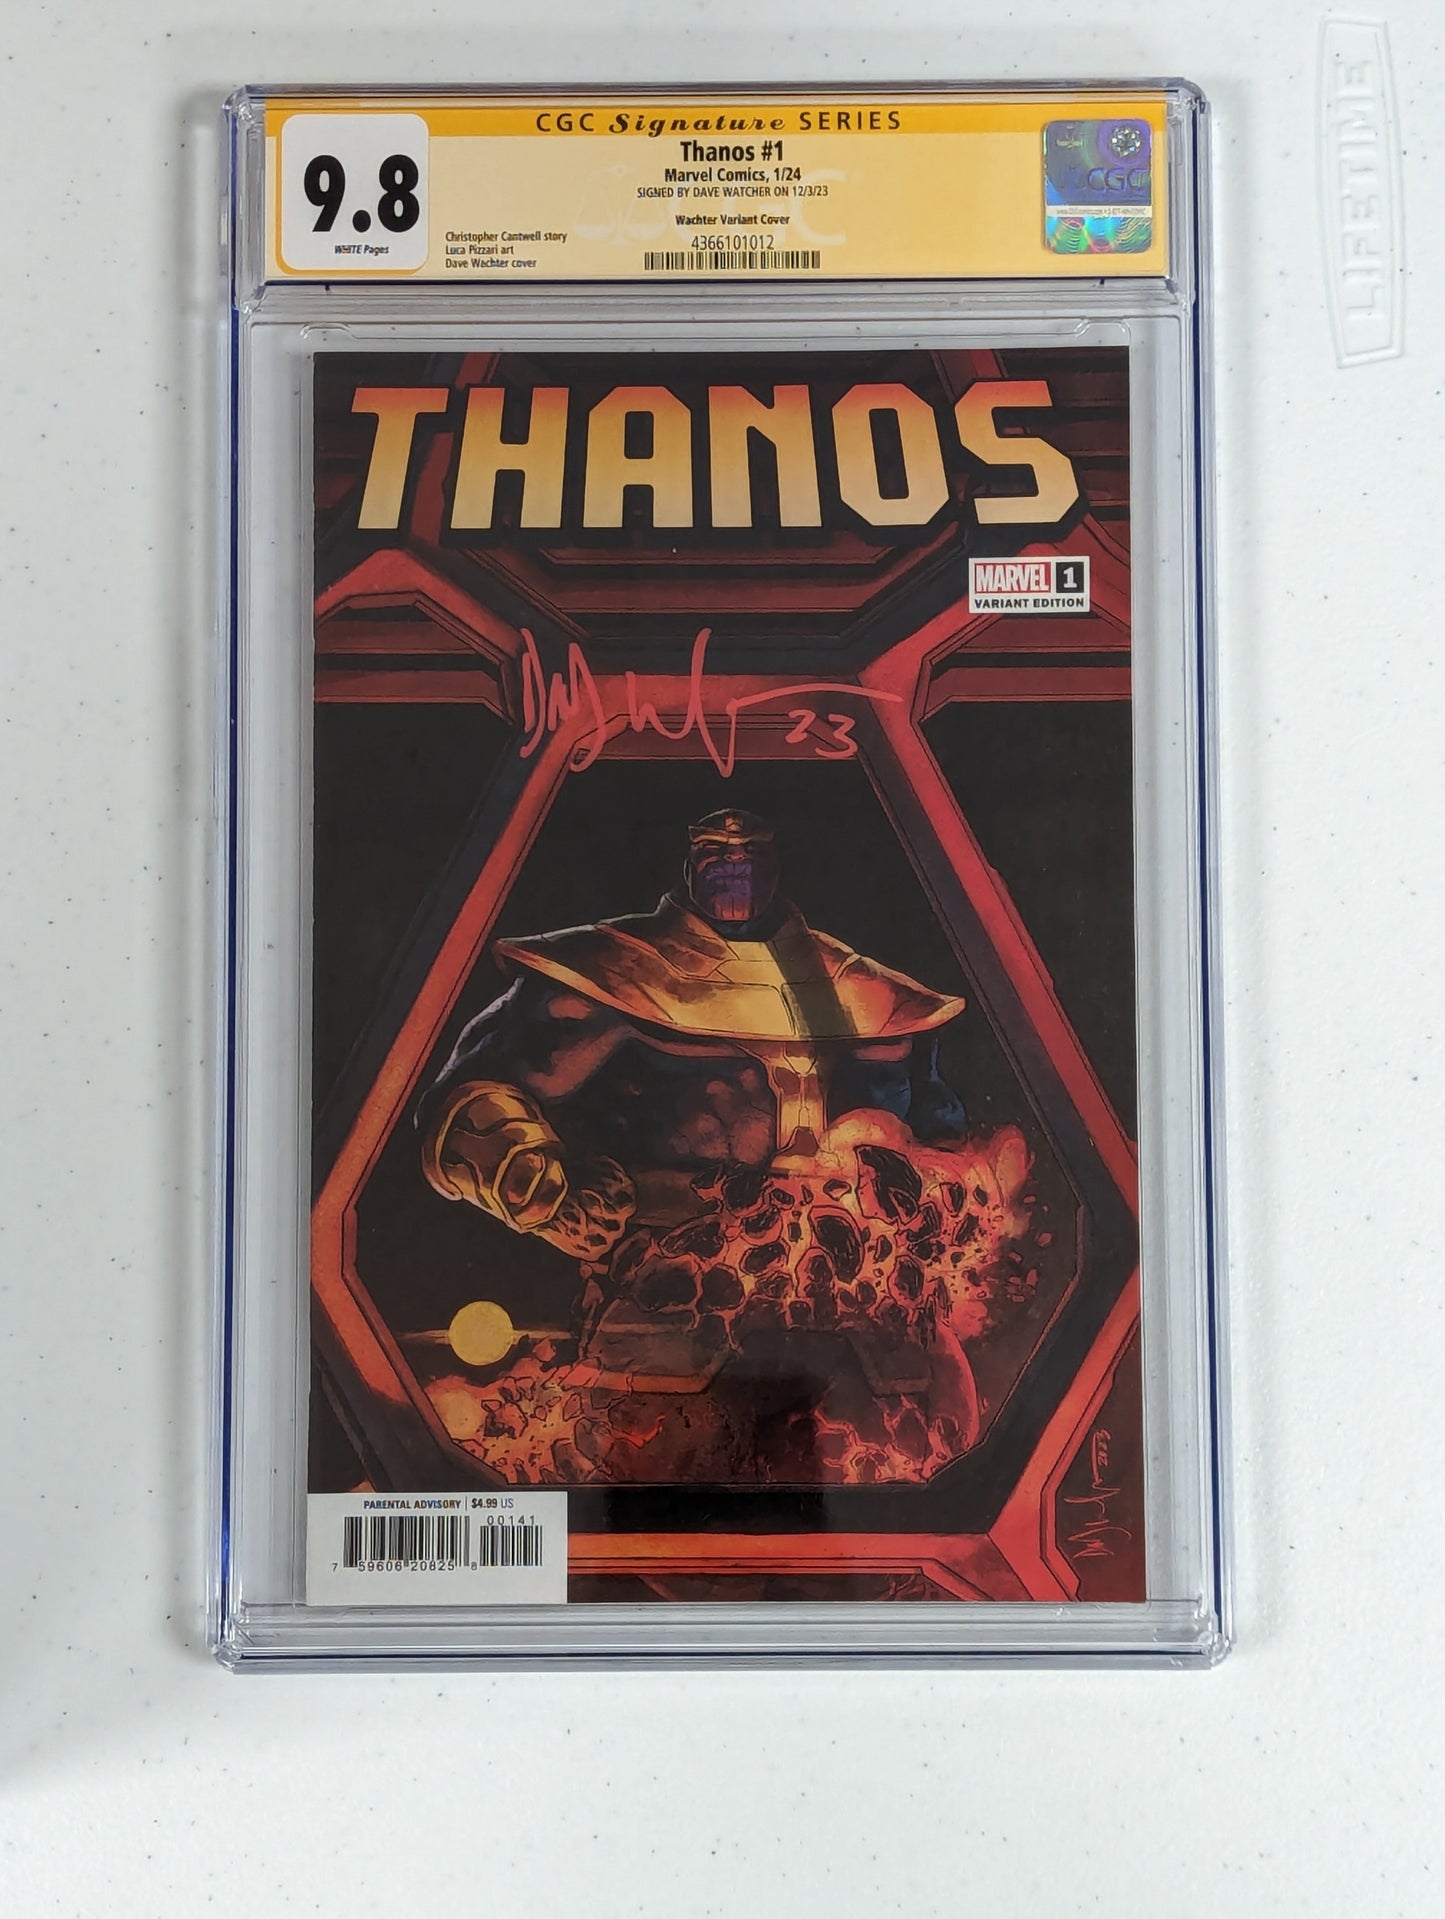 Thanos #1 Windowshades Variant - CGC SS 9.8 - signed by Dave Wachter